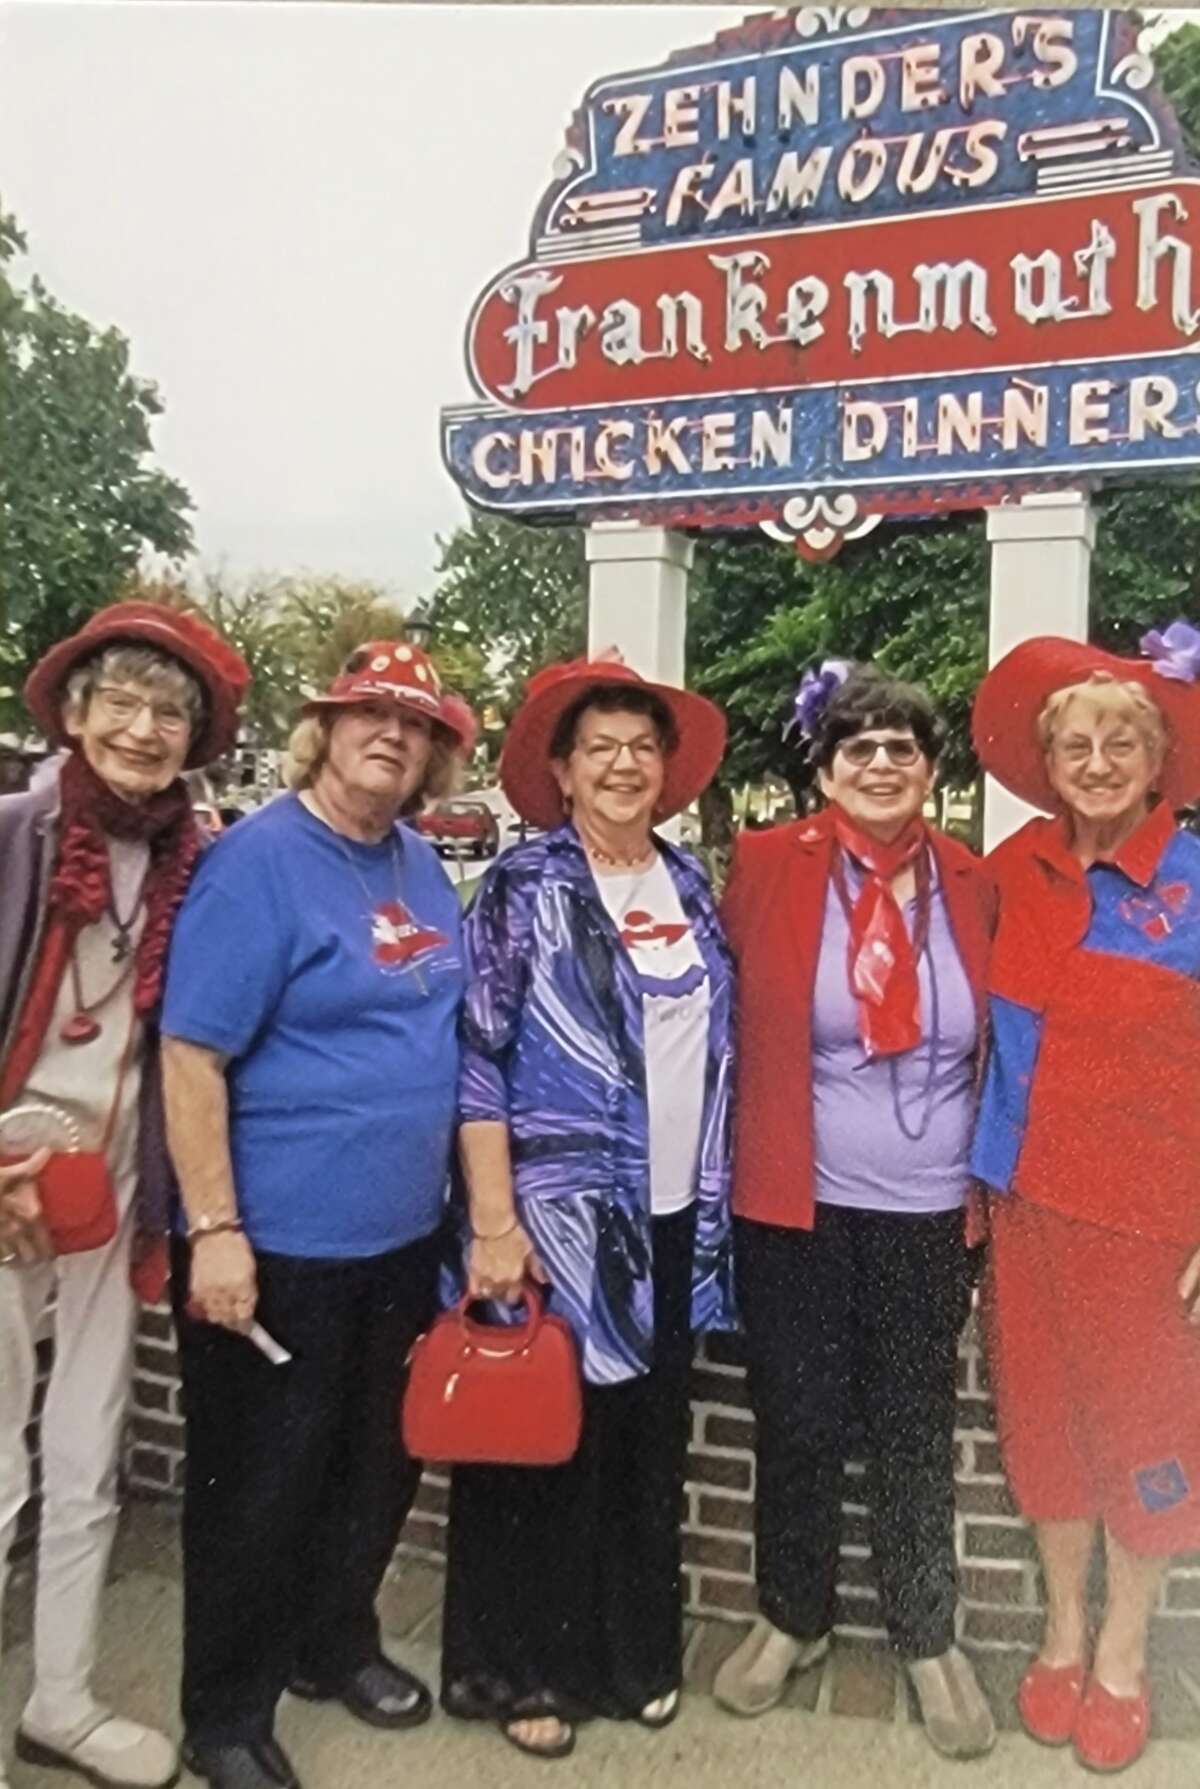 The Red Hats on the Go Chapter attended the Red Hat Society Days in Frankenmuth. Attending were Lola Morin, Nancy Nieschulz, Cherie Maurer, Kathy Morin and Pat Ignash.